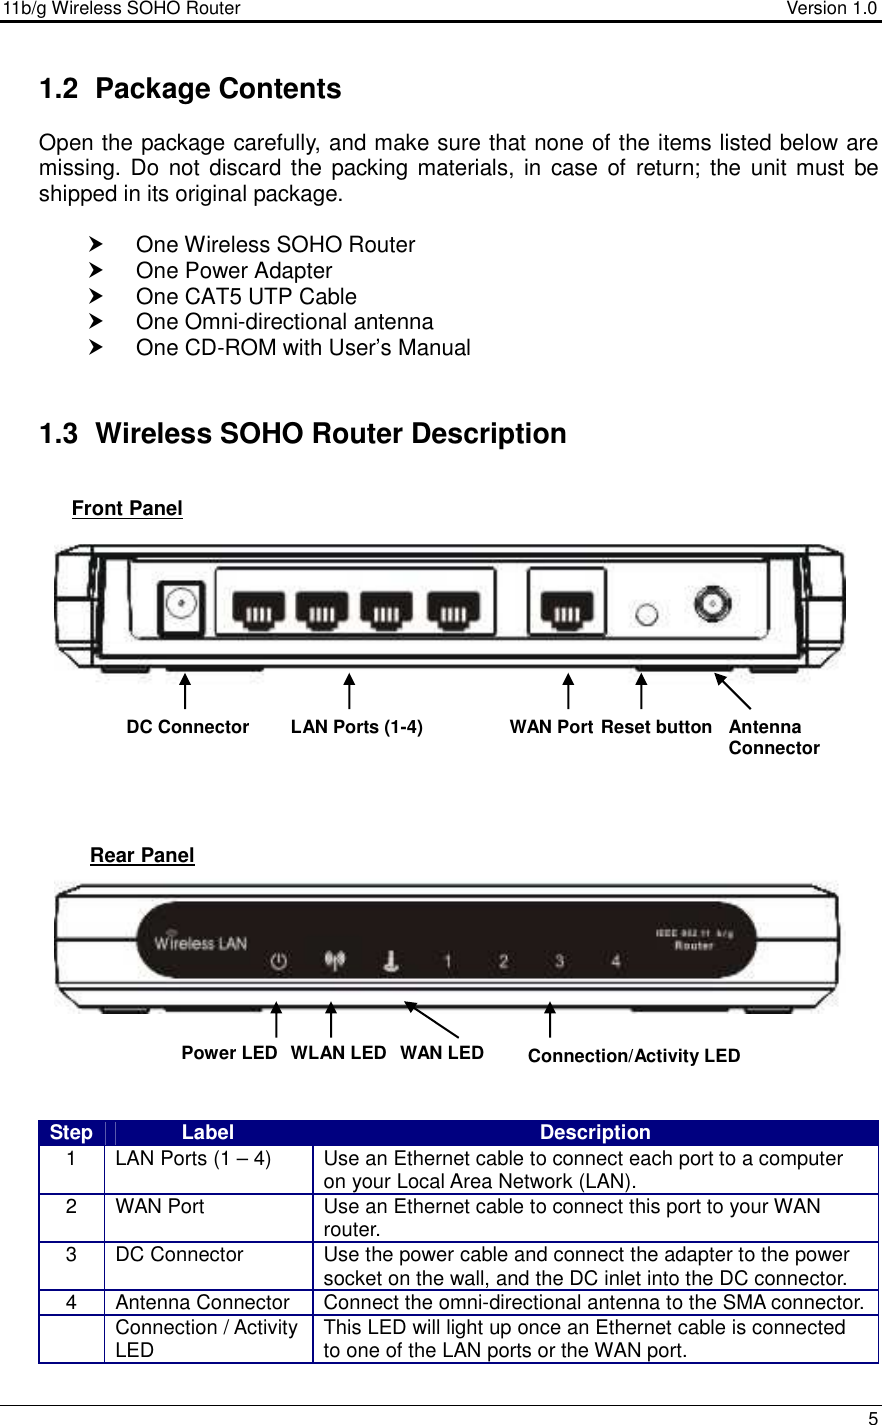 11b/g Wireless SOHO Router                                     Version 1.0    5  1.2  Package Contents Open the package carefully, and make sure that none of the items listed below are missing. Do  not discard the  packing materials,  in case  of  return; the  unit must  be shipped in its original package.    One Wireless SOHO Router   One Power Adapter   One CAT5 UTP Cable   One Omni-directional antenna   One CD-ROM with User’s Manual   1.3  Wireless SOHO Router Description                           Step Label  Description 1  LAN Ports (1 – 4)  Use an Ethernet cable to connect each port to a computer on your Local Area Network (LAN). 2  WAN Port   Use an Ethernet cable to connect this port to your WAN router. 3  DC Connector  Use the power cable and connect the adapter to the power socket on the wall, and the DC inlet into the DC connector. 4  Antenna Connector  Connect the omni-directional antenna to the SMA connector.    Connection / Activity LED  This LED will light up once an Ethernet cable is connected to one of the LAN ports or the WAN port.  LAN Ports (1-4) WAN Port DC Connector Connection/Activity LED Power LED Front Panel Rear Panel WLAN LED WAN LED Reset button Antenna Connector 